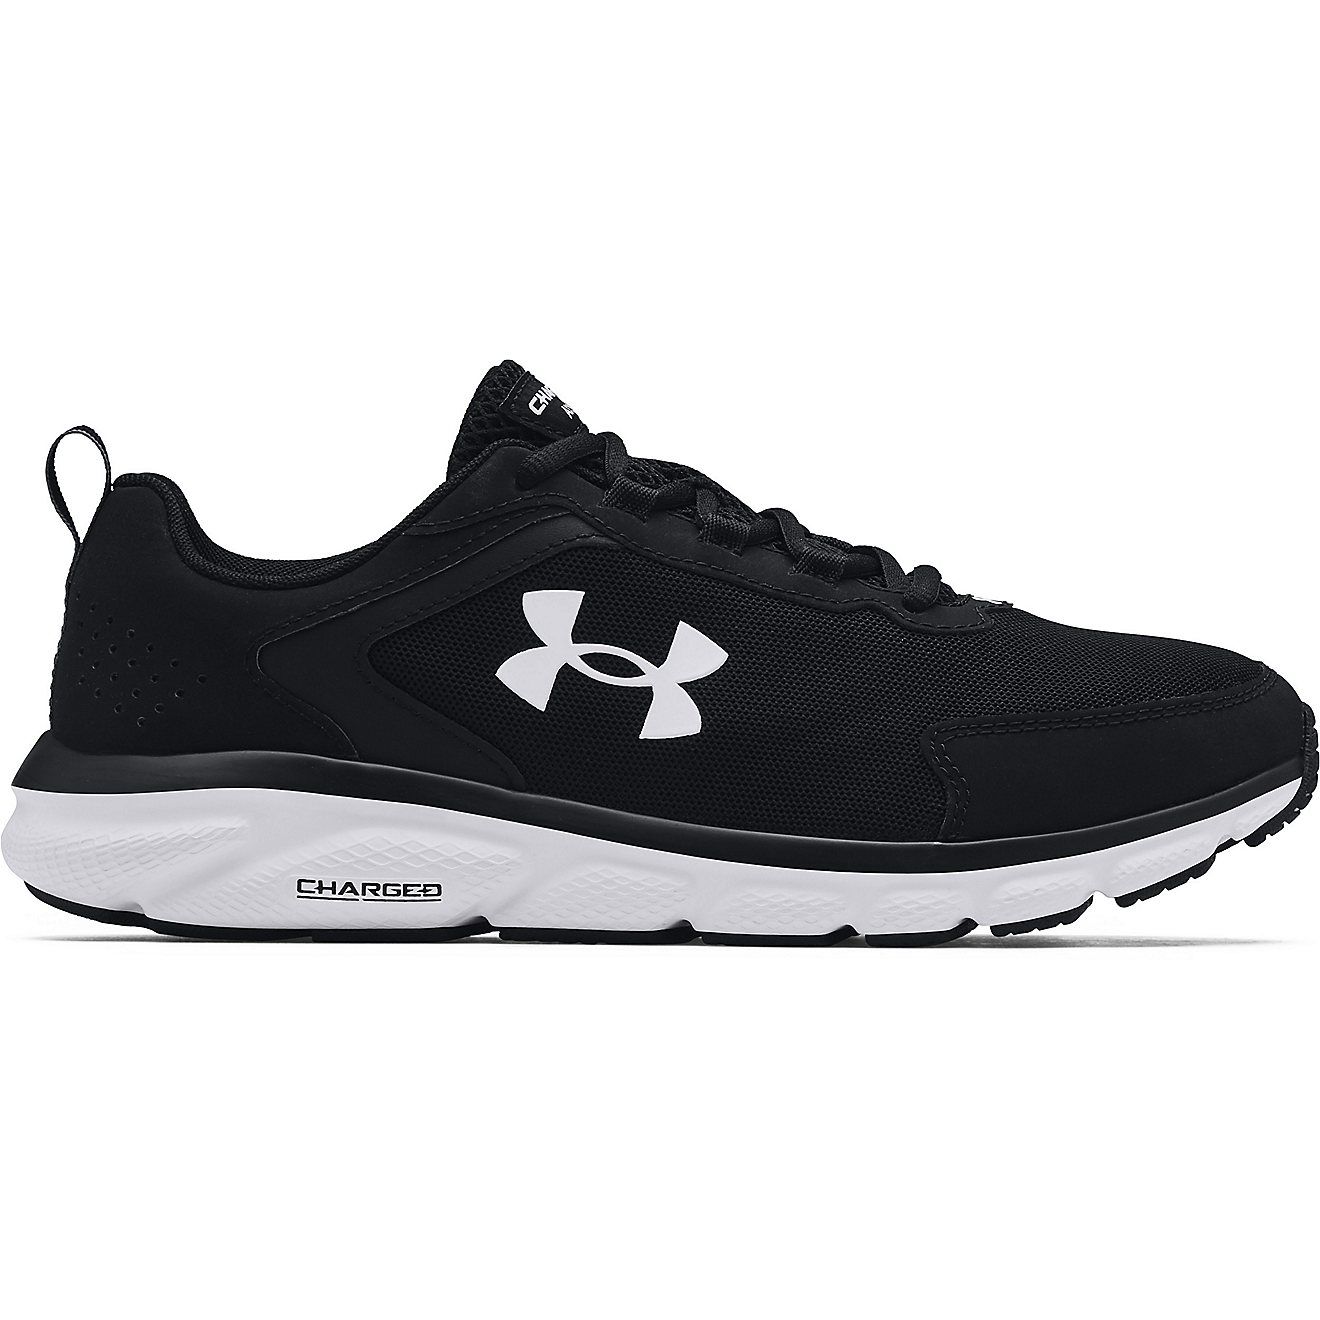 Under Armour Men's Charged Assert 9 Running Shoes | Academy Sports + Outdoors